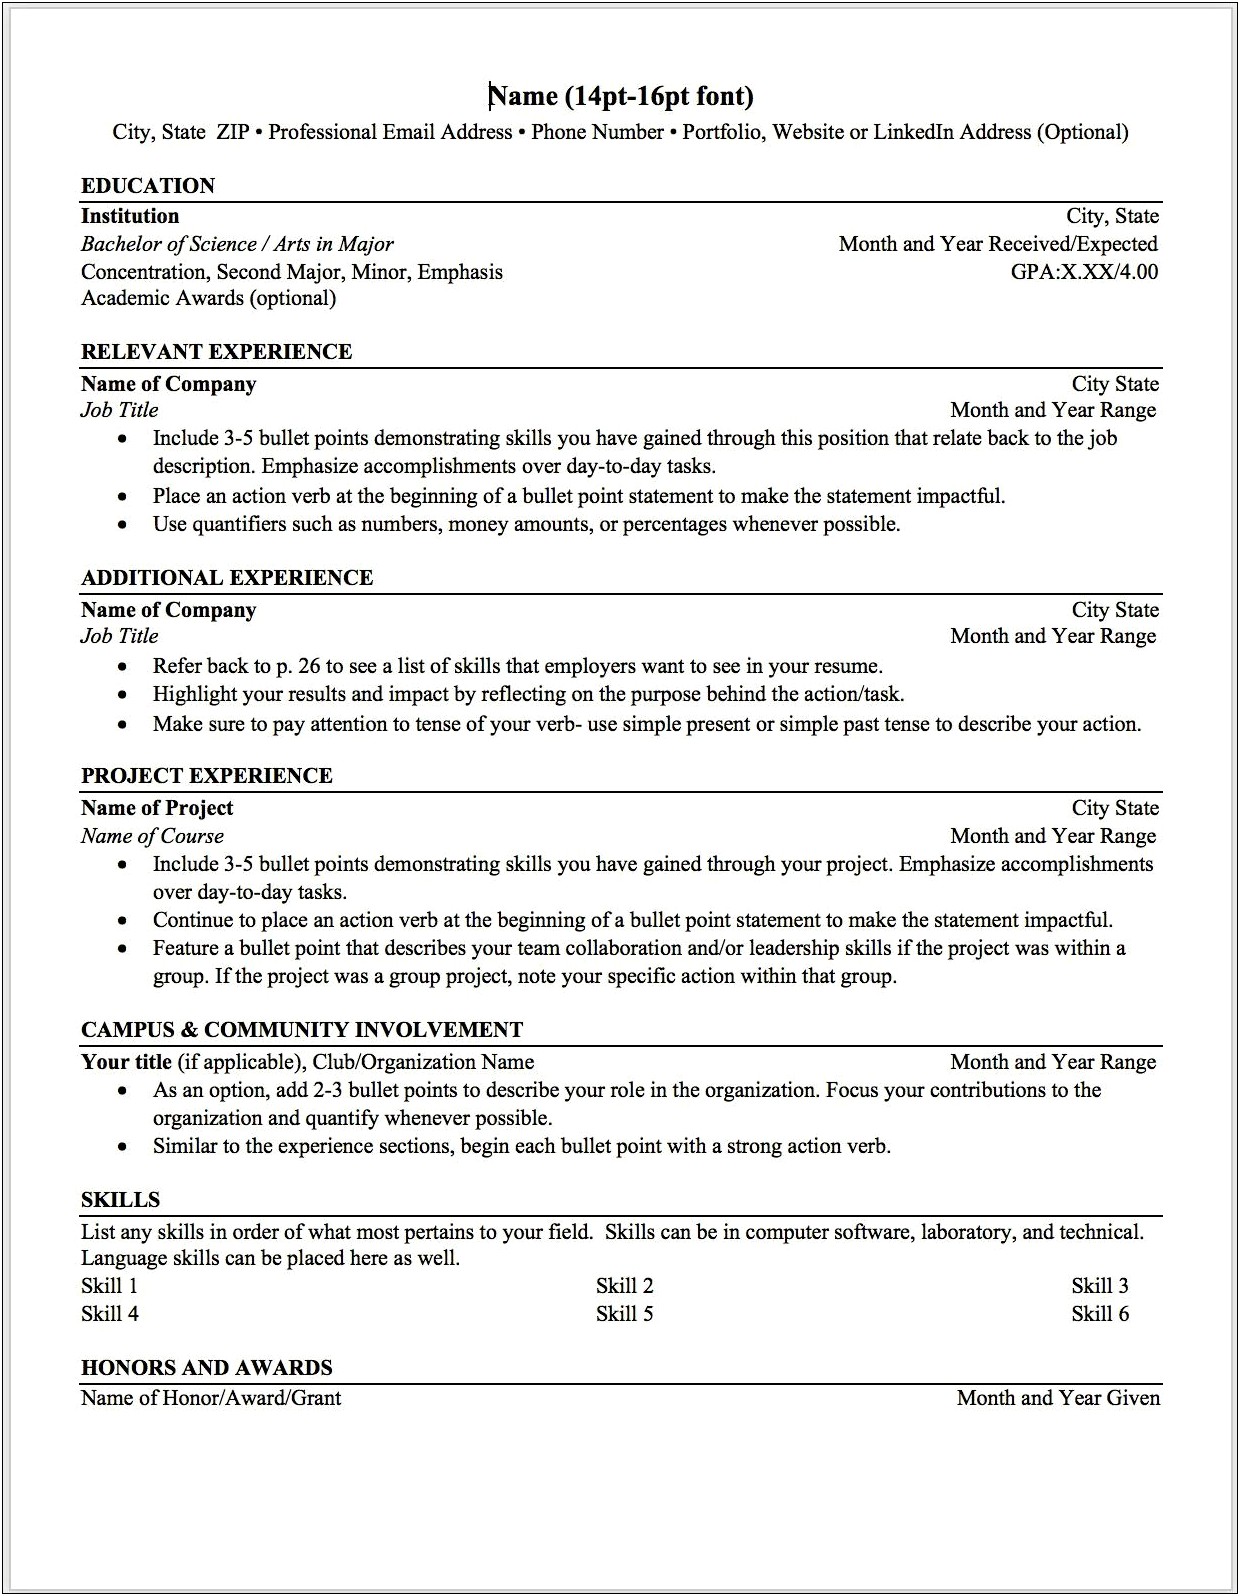 Resume For On Campus Jobs Pdf